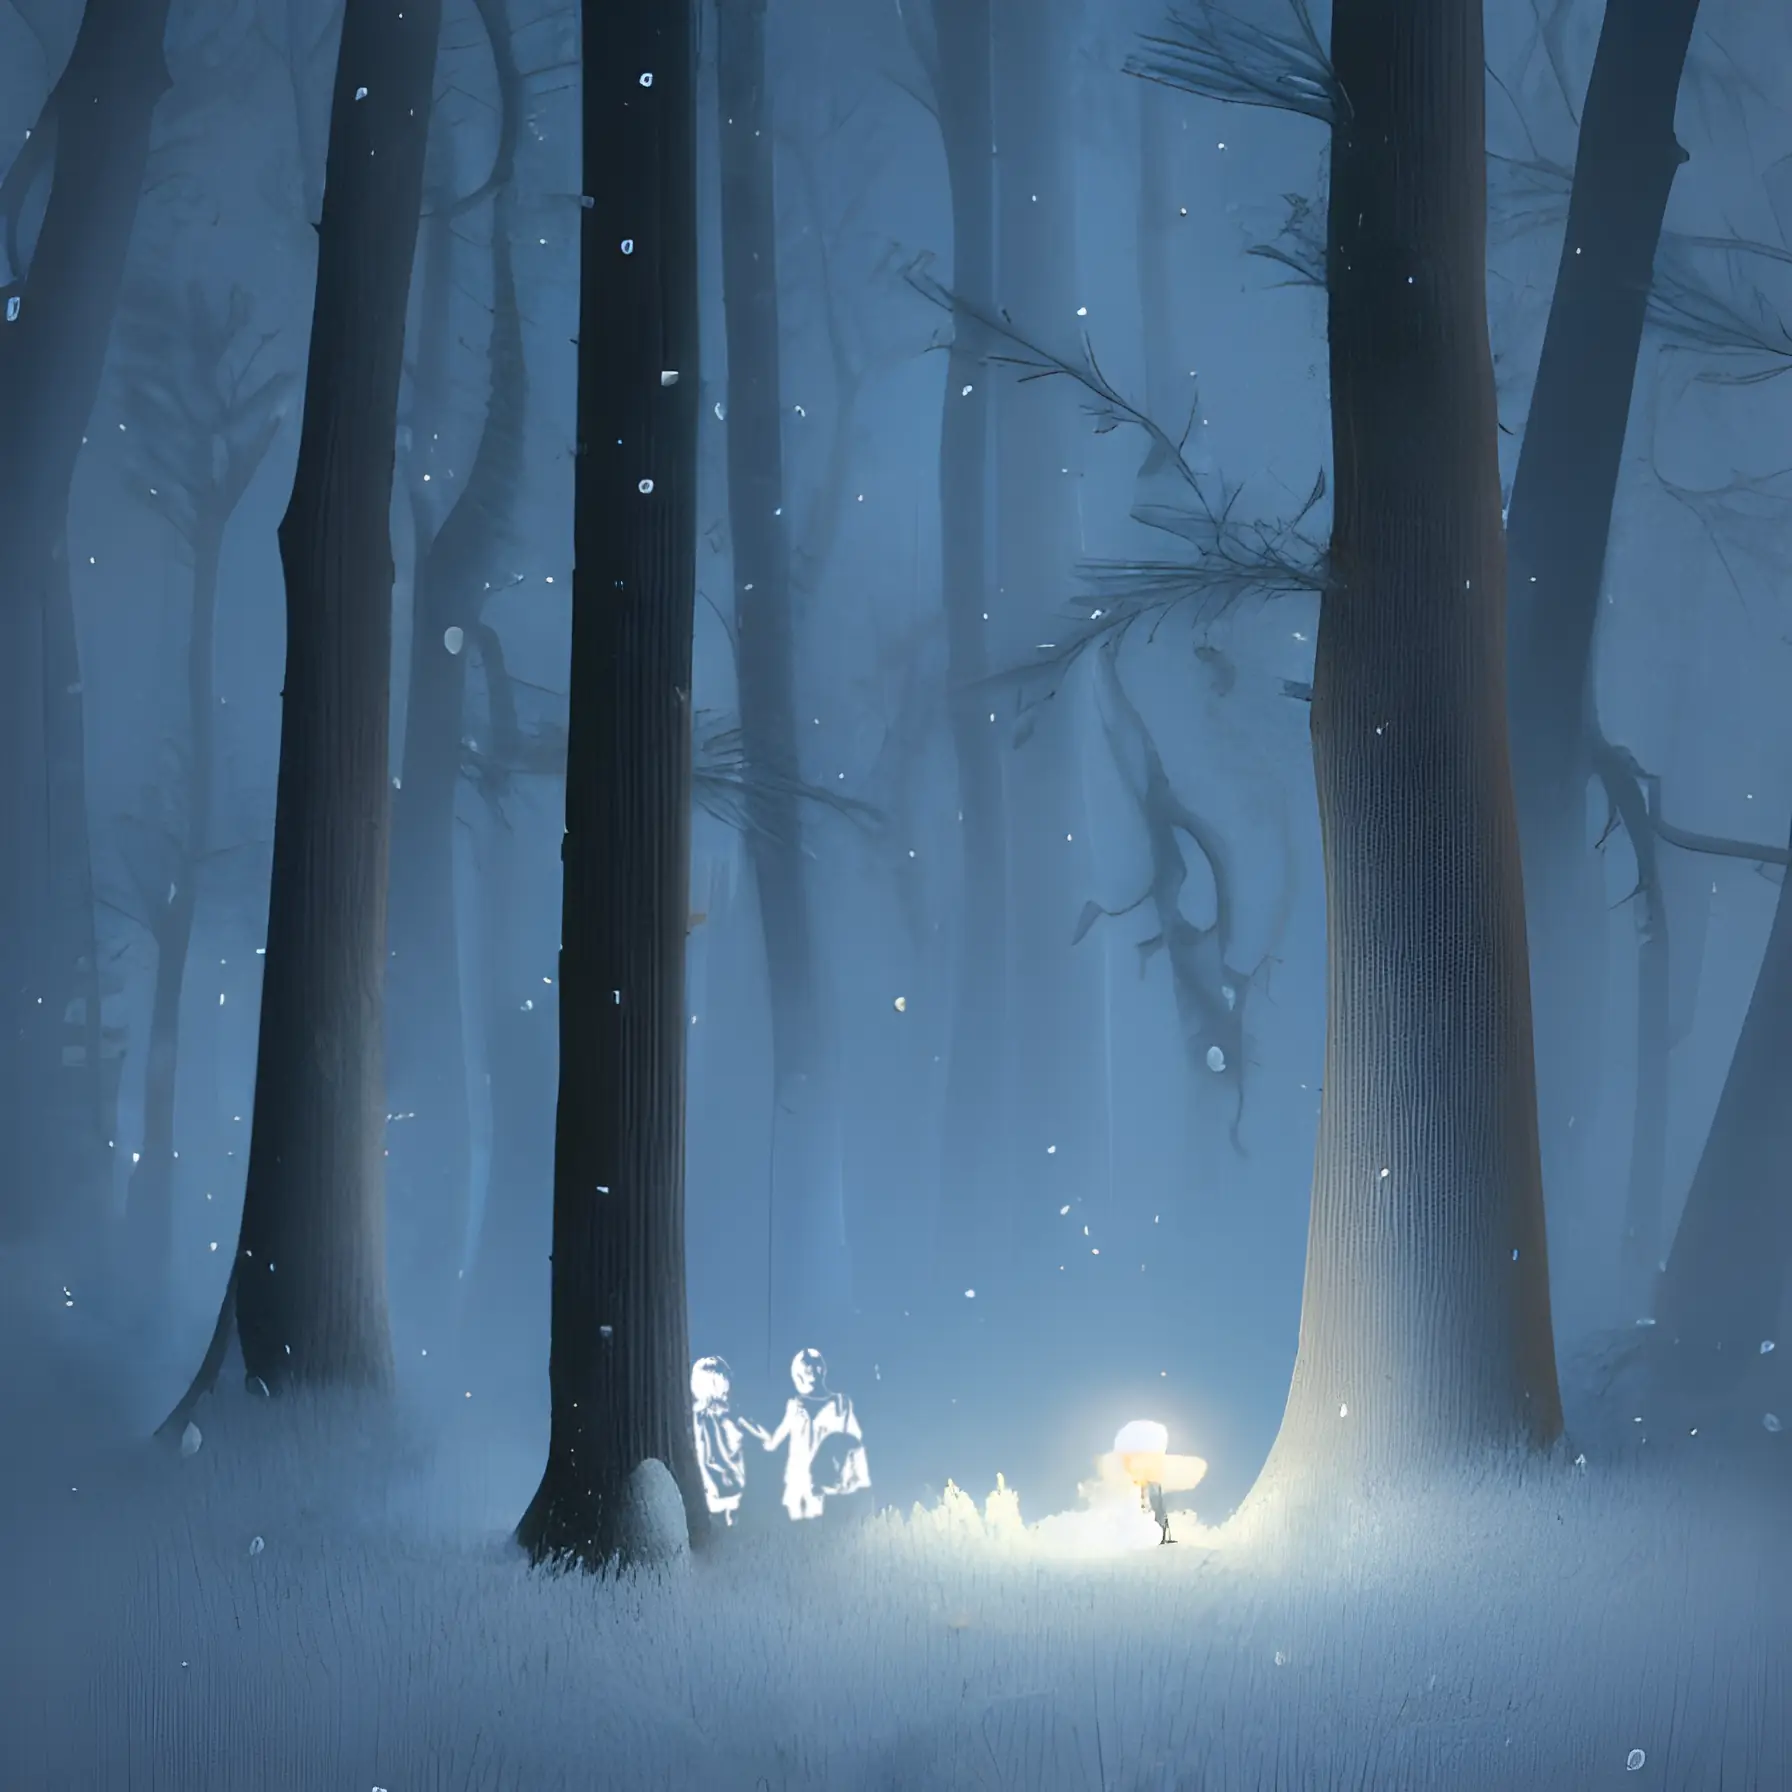 An artistic rendering of a woods in the winter at night. There is a light glowing up from the ground in one spot.